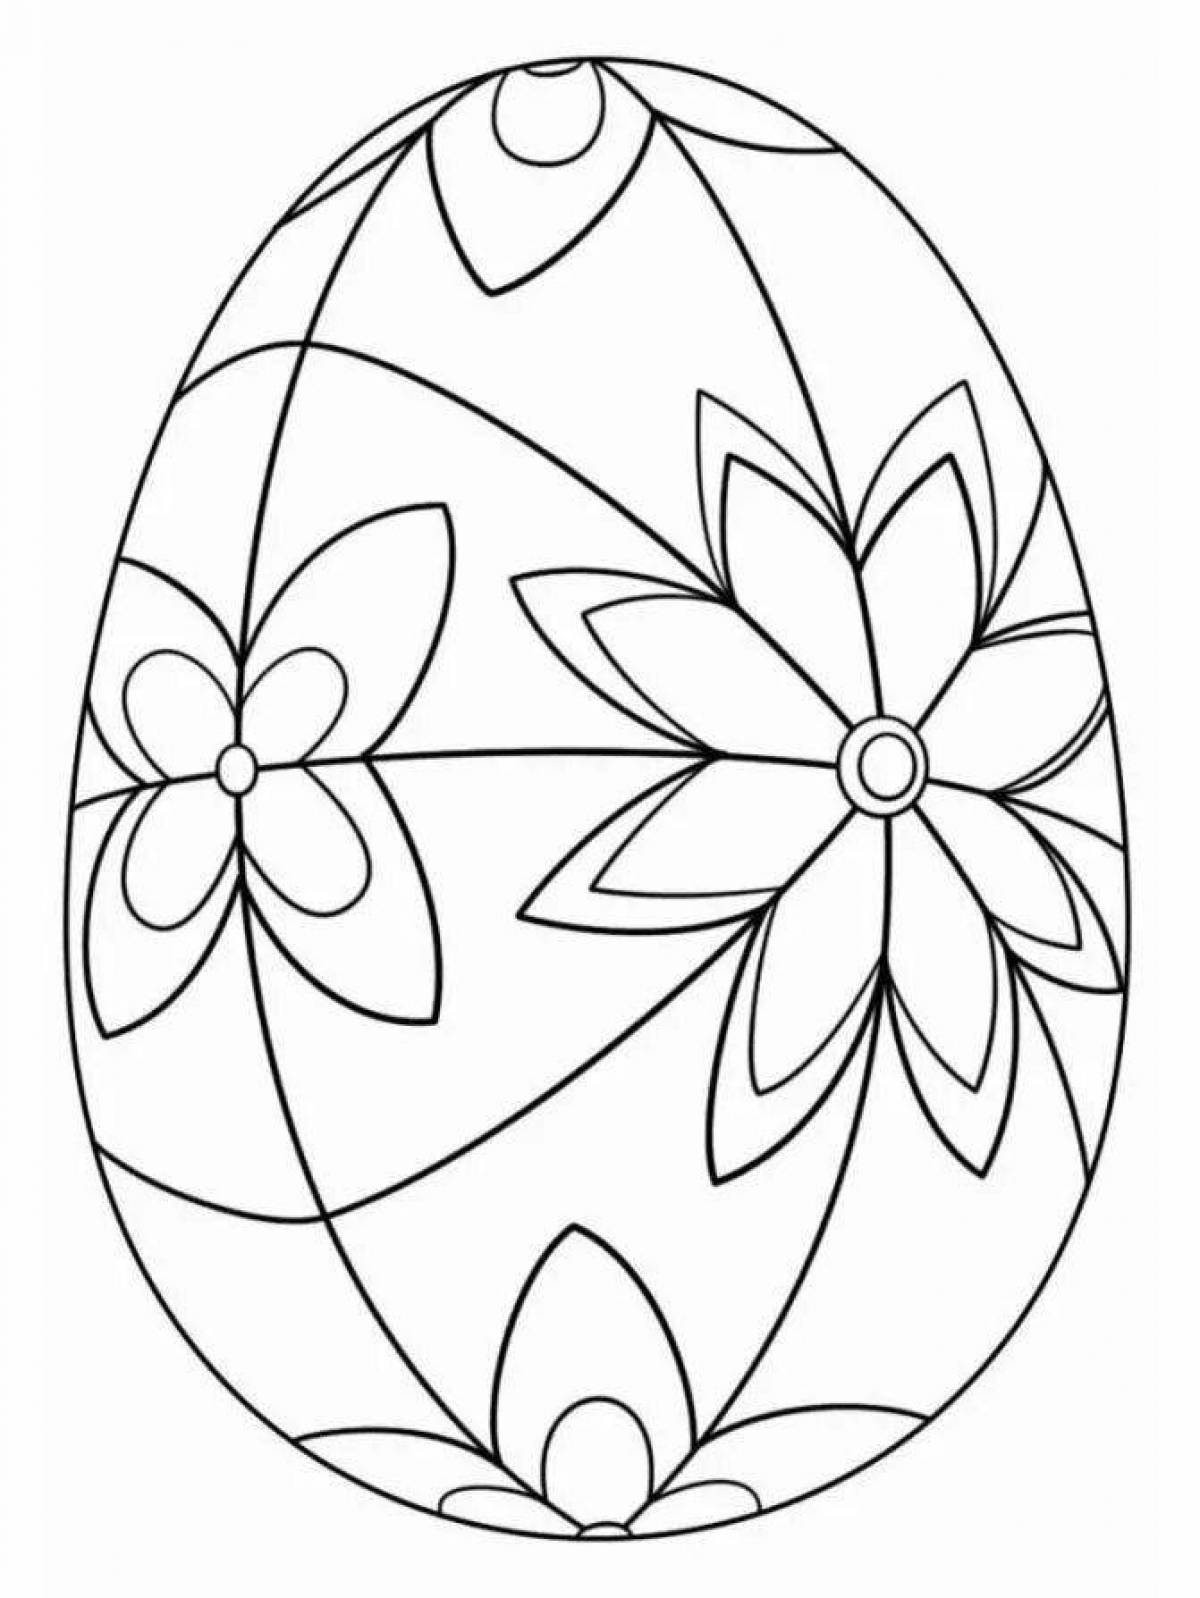 Glitter easter egg coloring page